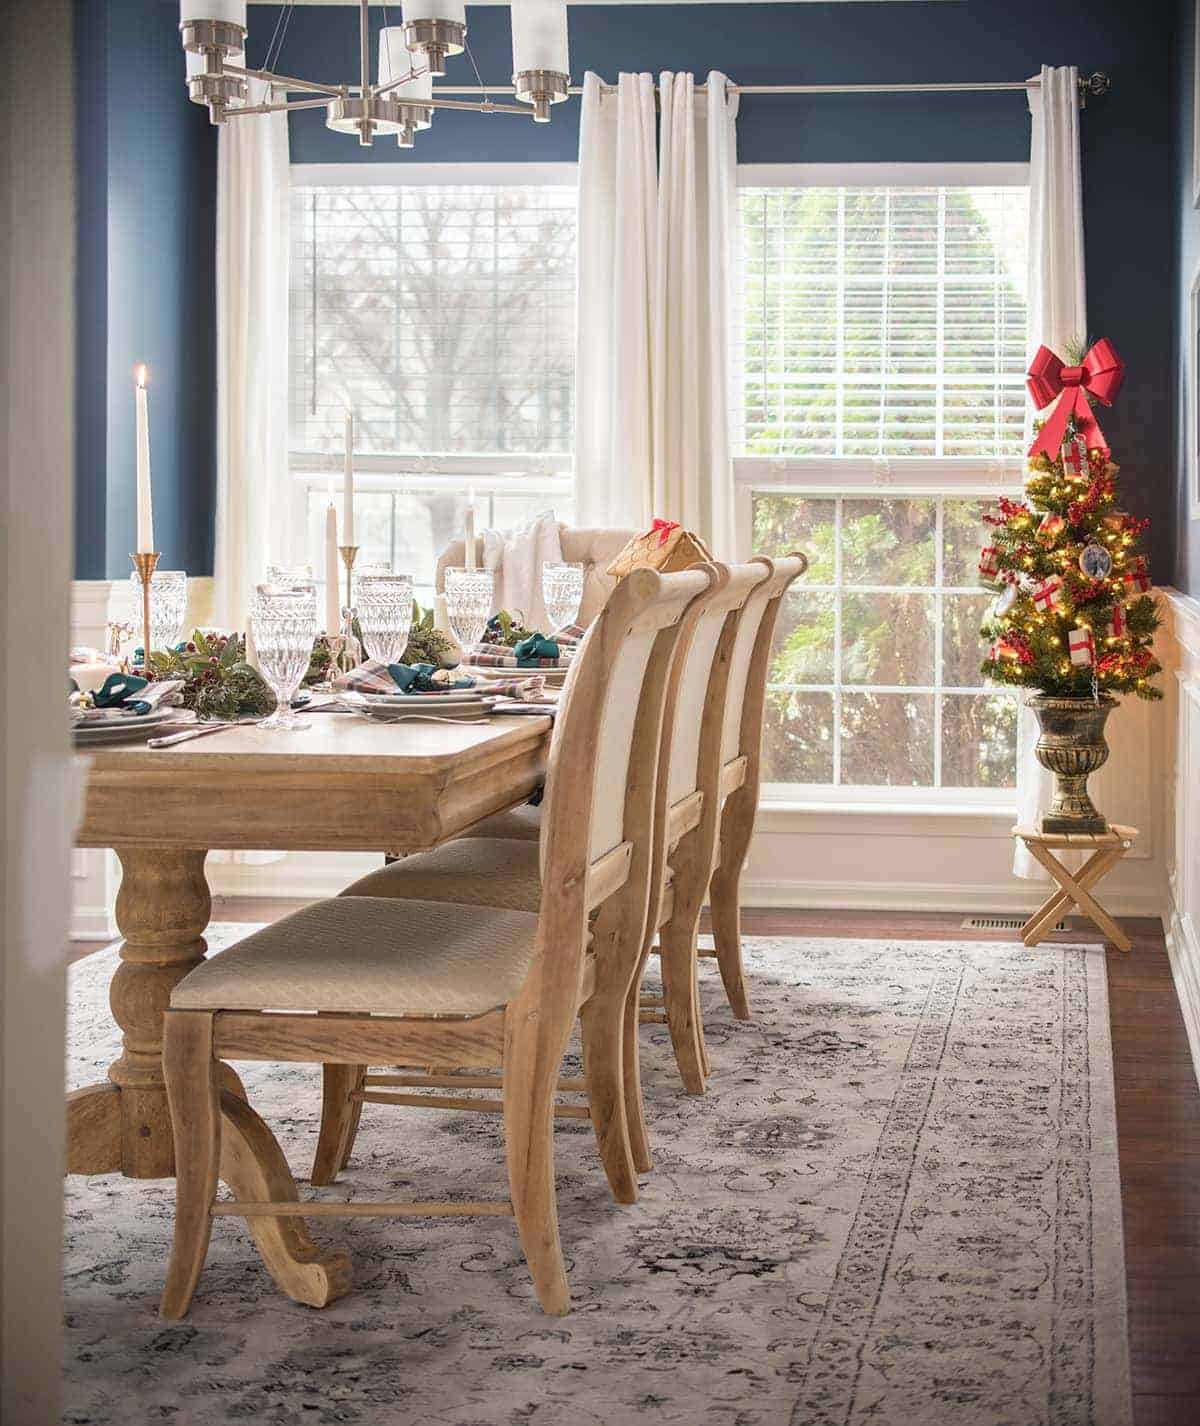 Raw Wood Christmas Dining Room Table and Raw Wood Dining Room chairs. Small twinkling Christmas tree in the corner.